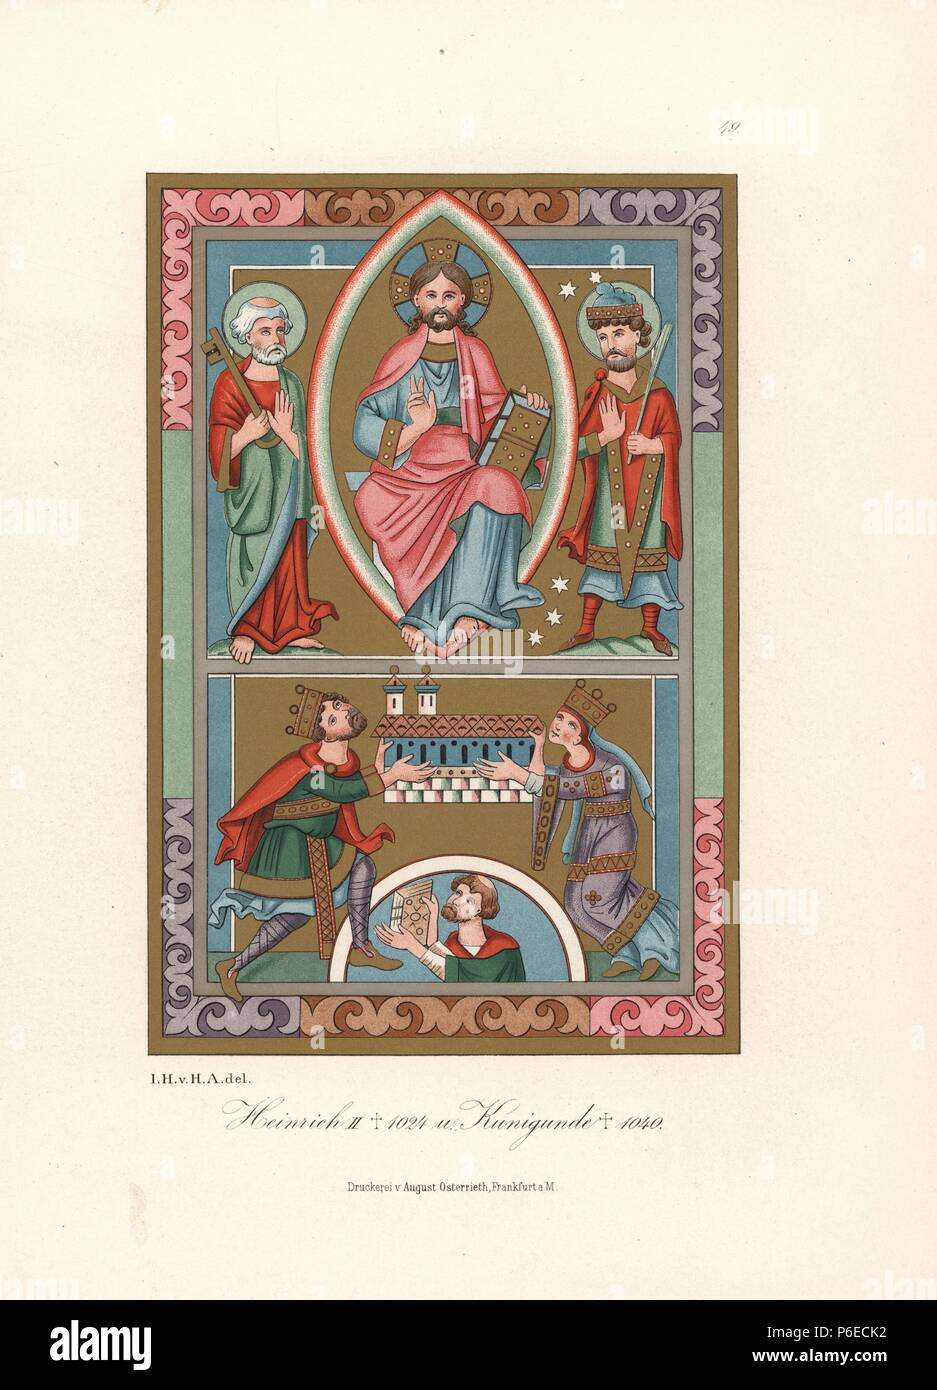 Portrait of Holy Roman Emperor Henry II and his wife Saint Cunigunde of Luxembourg from an illuminated missal in Hamberg library. Chromolithograph from Hefner-Alteneck's 'Costumes, Artworks and Appliances from the Middle Ages to the 17th Century,' Frankfurt, 1879. Illustration by Dr. Jakob Heinrich von Hefner-Alteneck and published by Heinrich Keller. Hefner-Alteneck (1811 - 1903) was a German museum curator, archaeologist, art historian, illustrator and etcher. Stock Photo